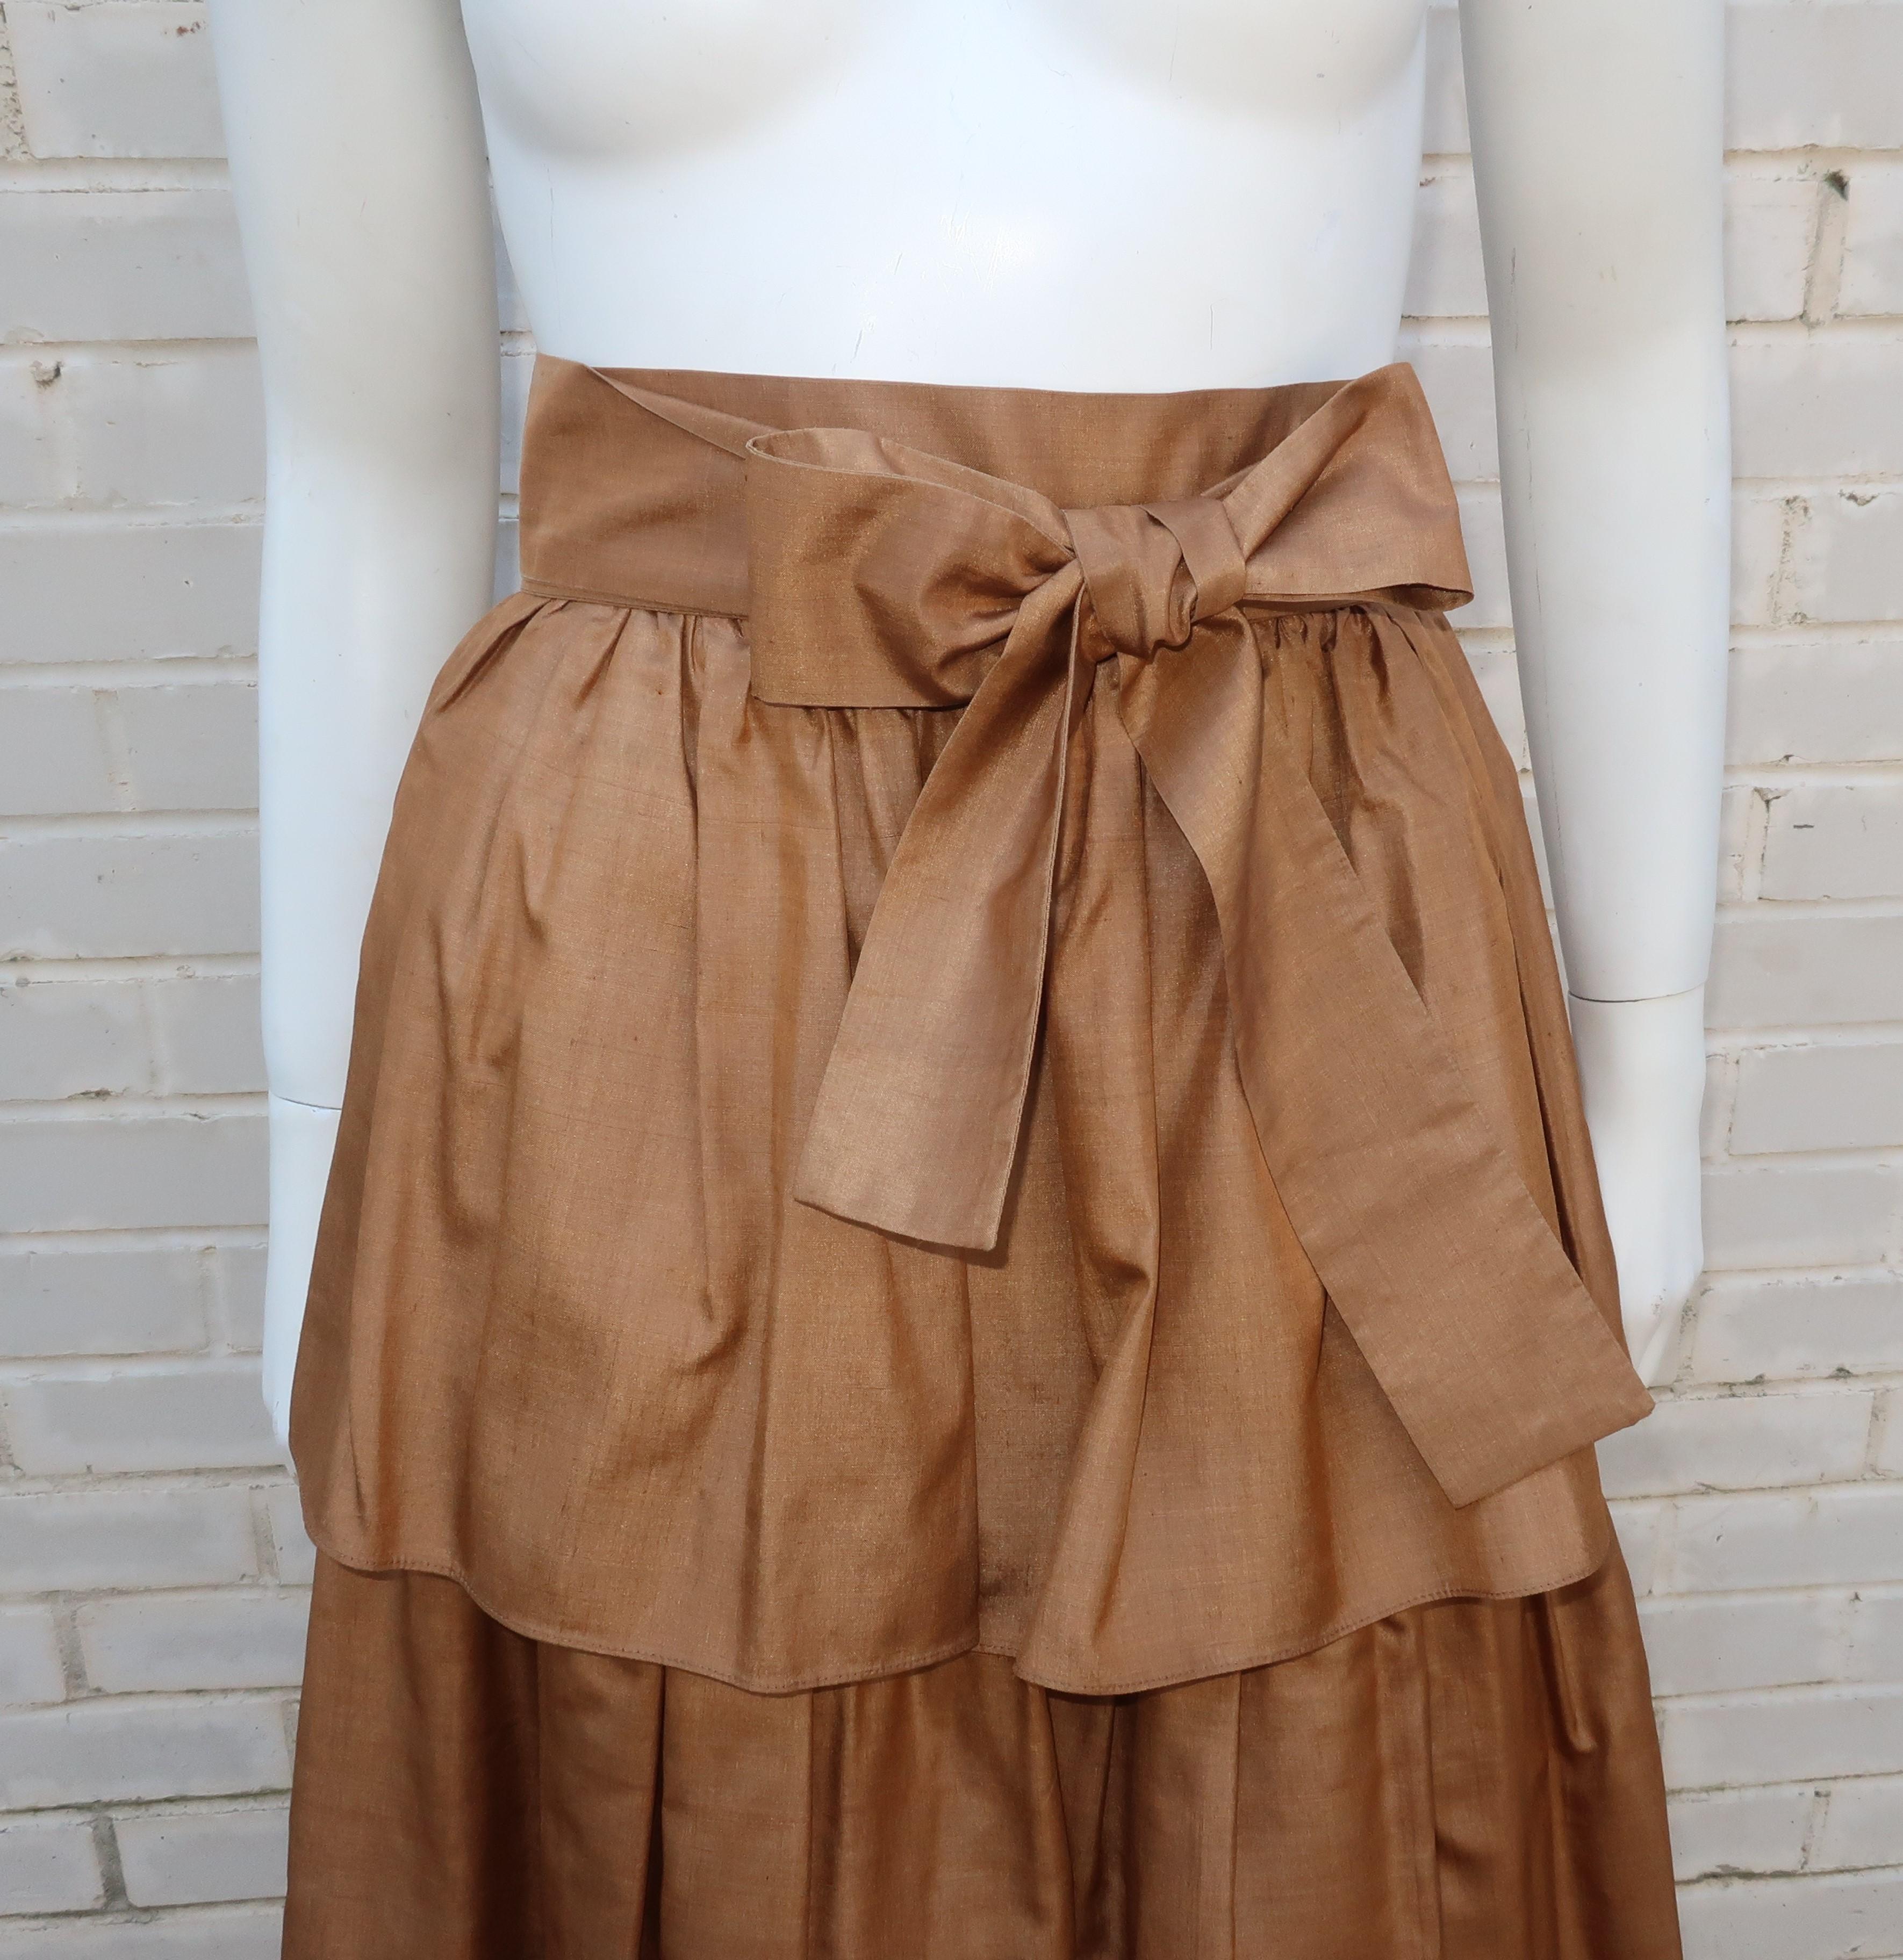 YVES SAINT LAURENT Rive Gauche Silk Tiered Peasant Skirt, 1970's In Good Condition For Sale In Atlanta, GA